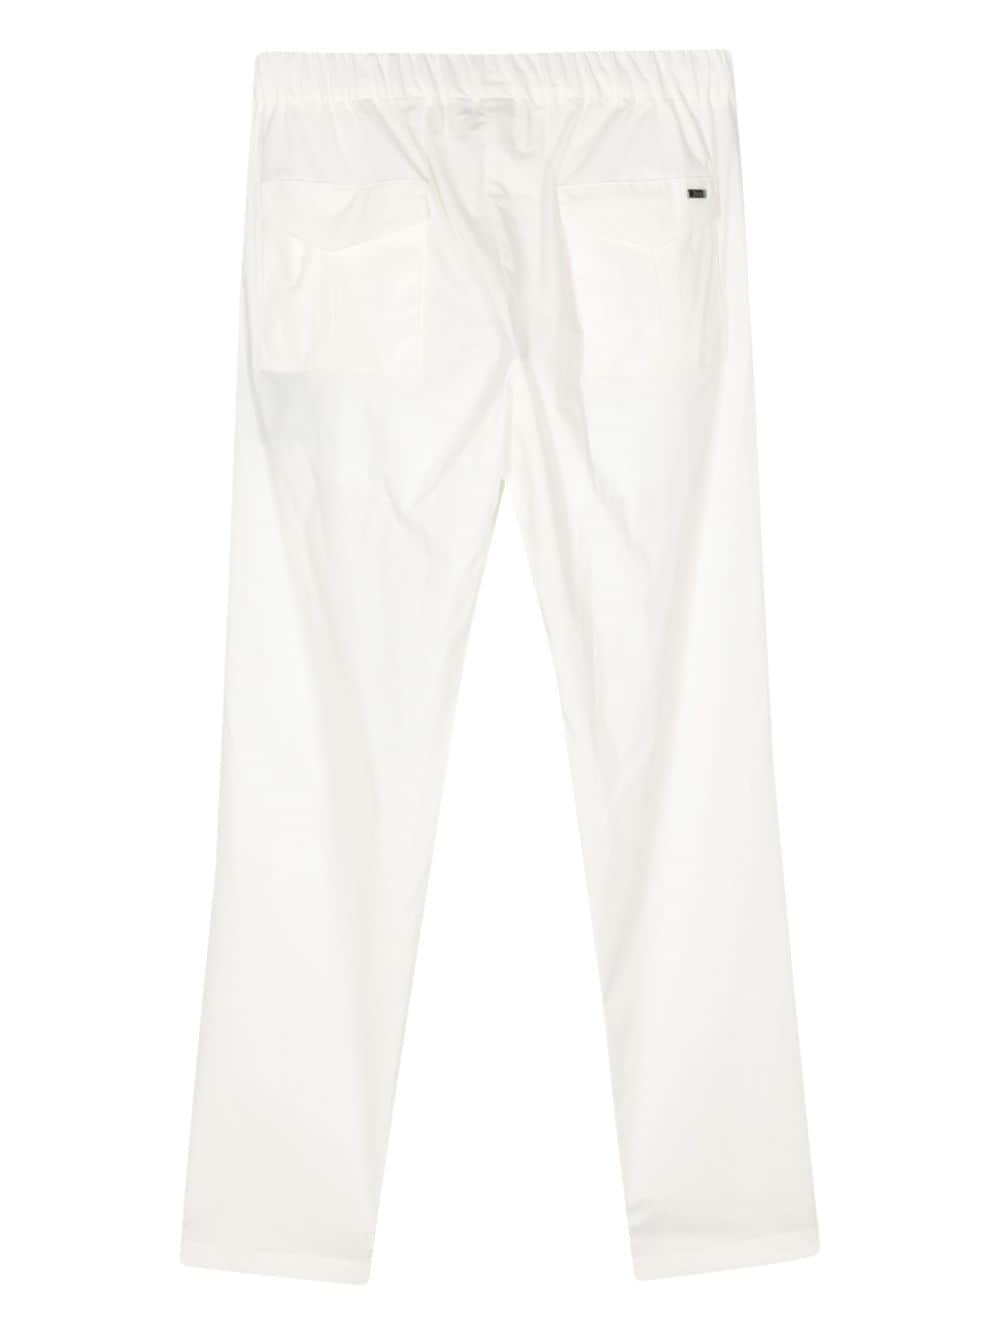 Pantalone bianco con coulisse